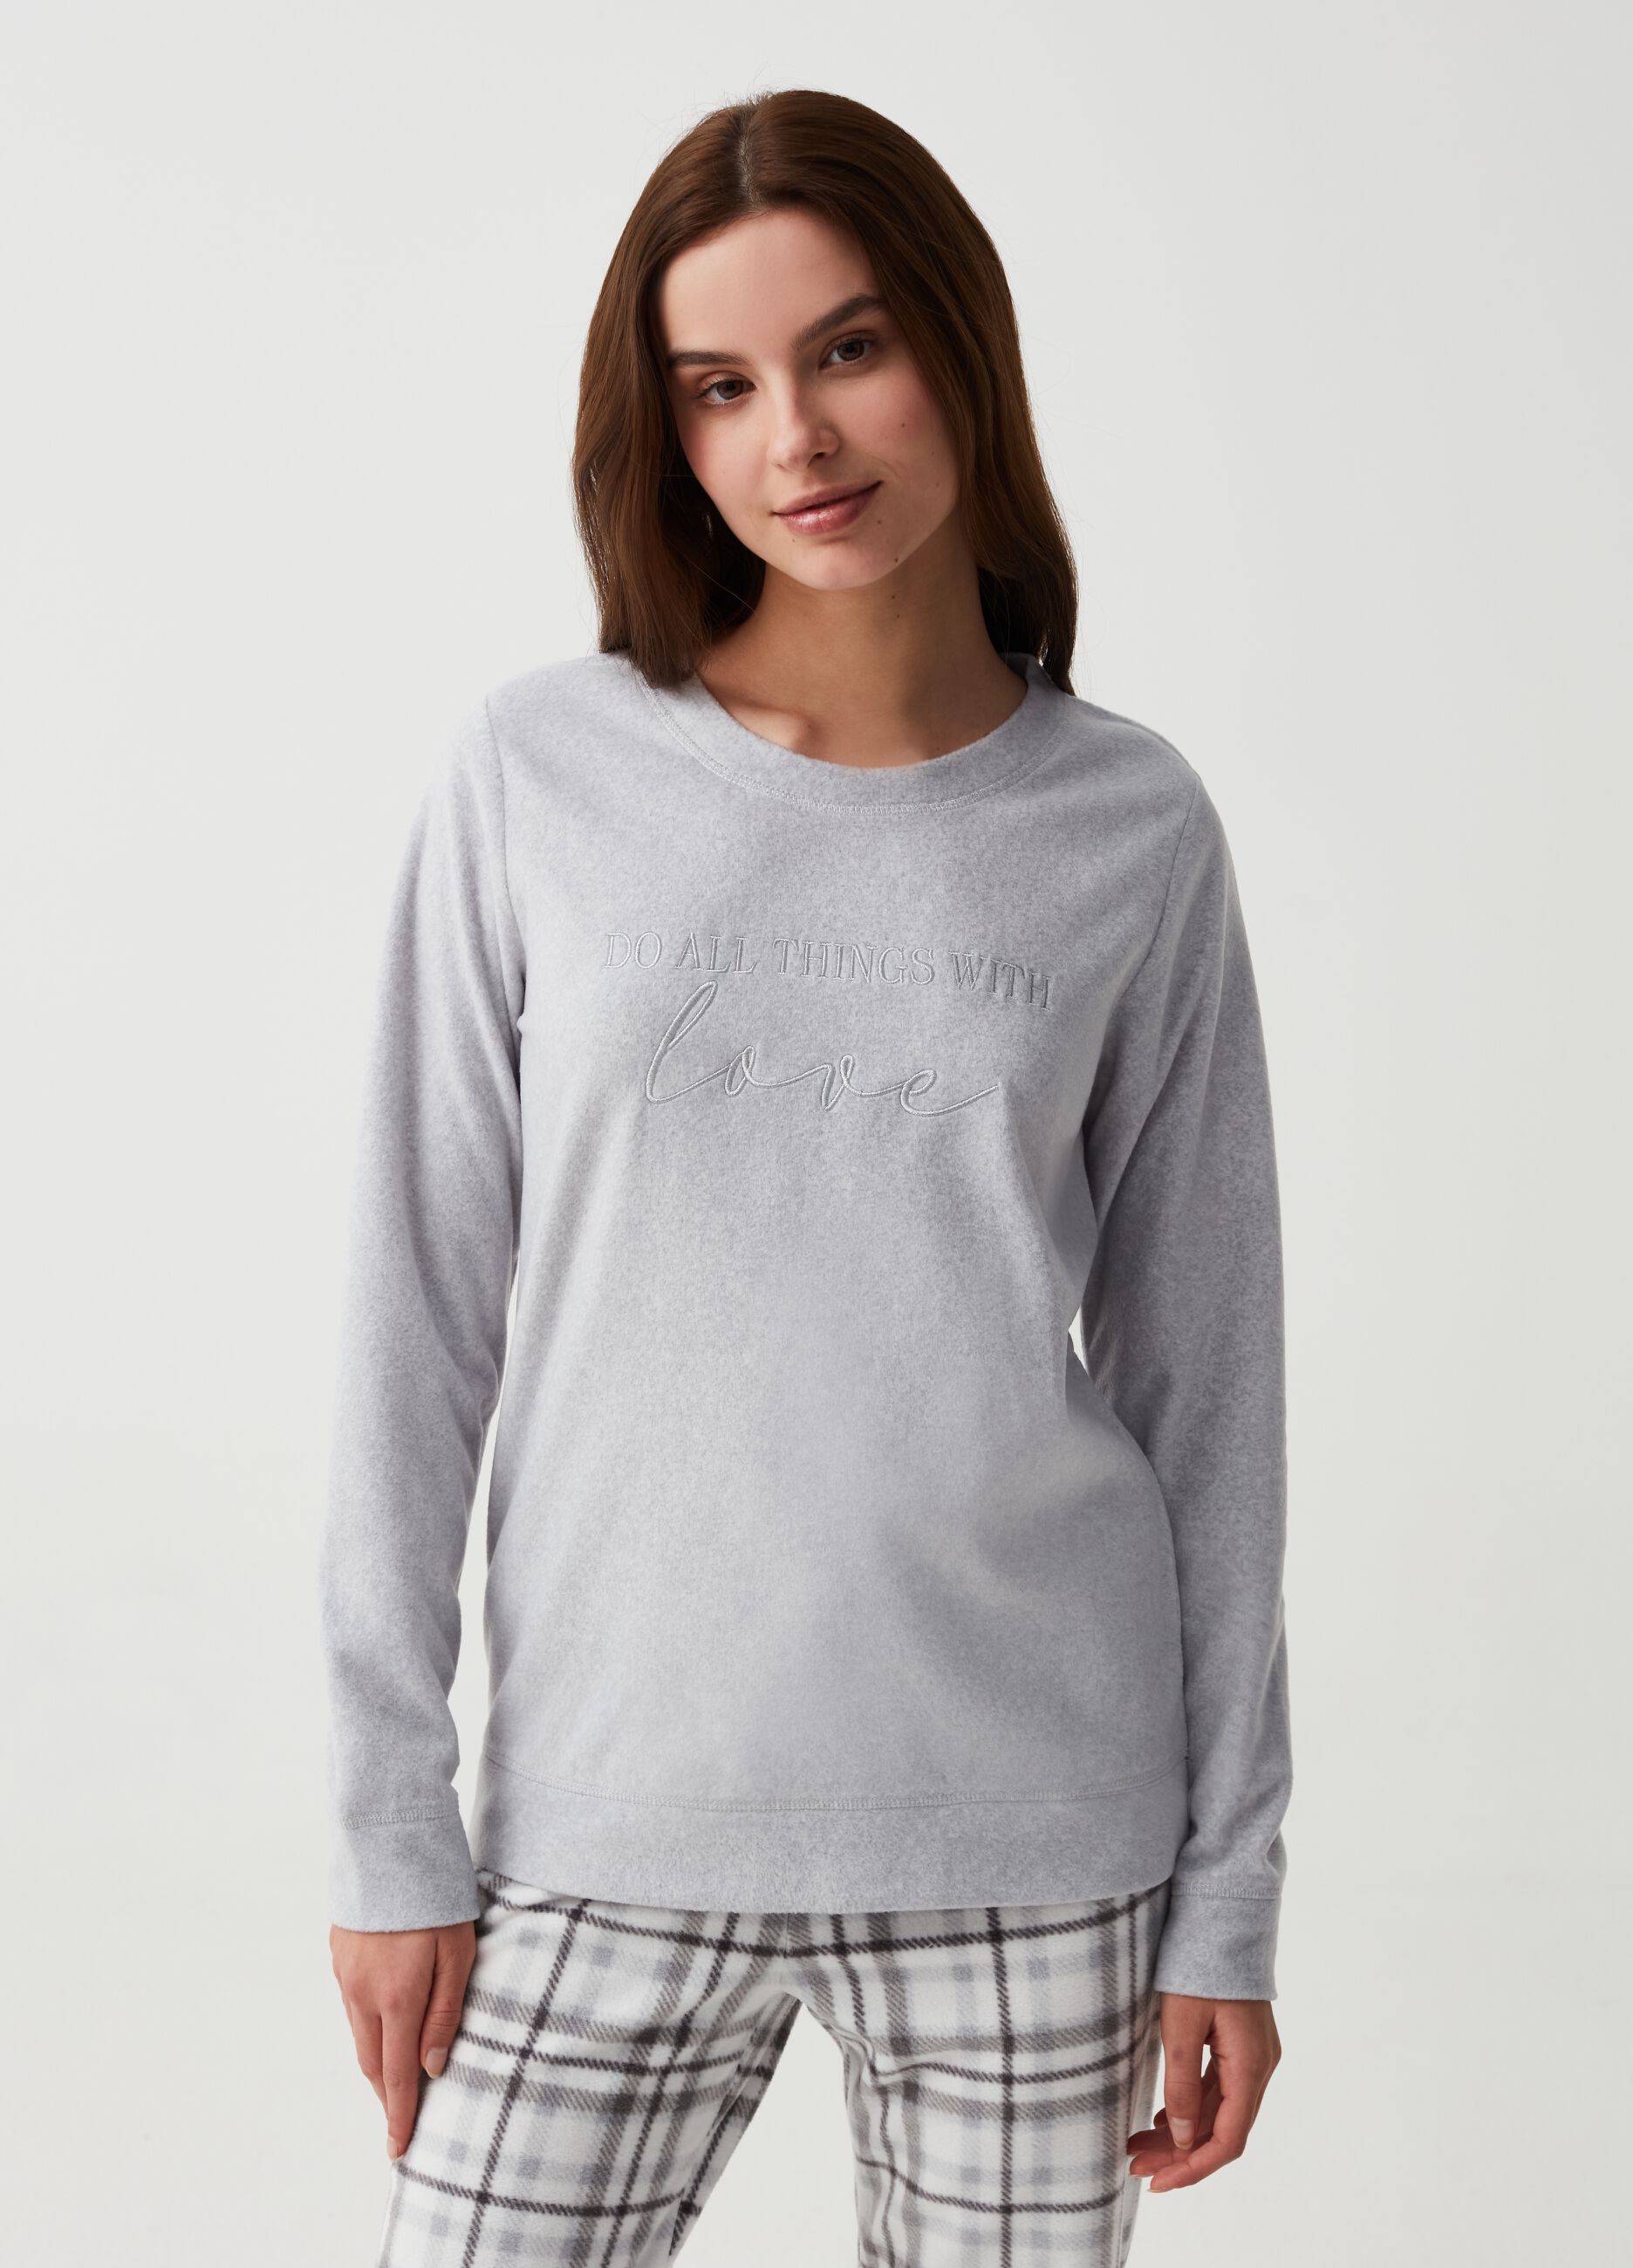 Fleece pyjama top with embroidered lettering